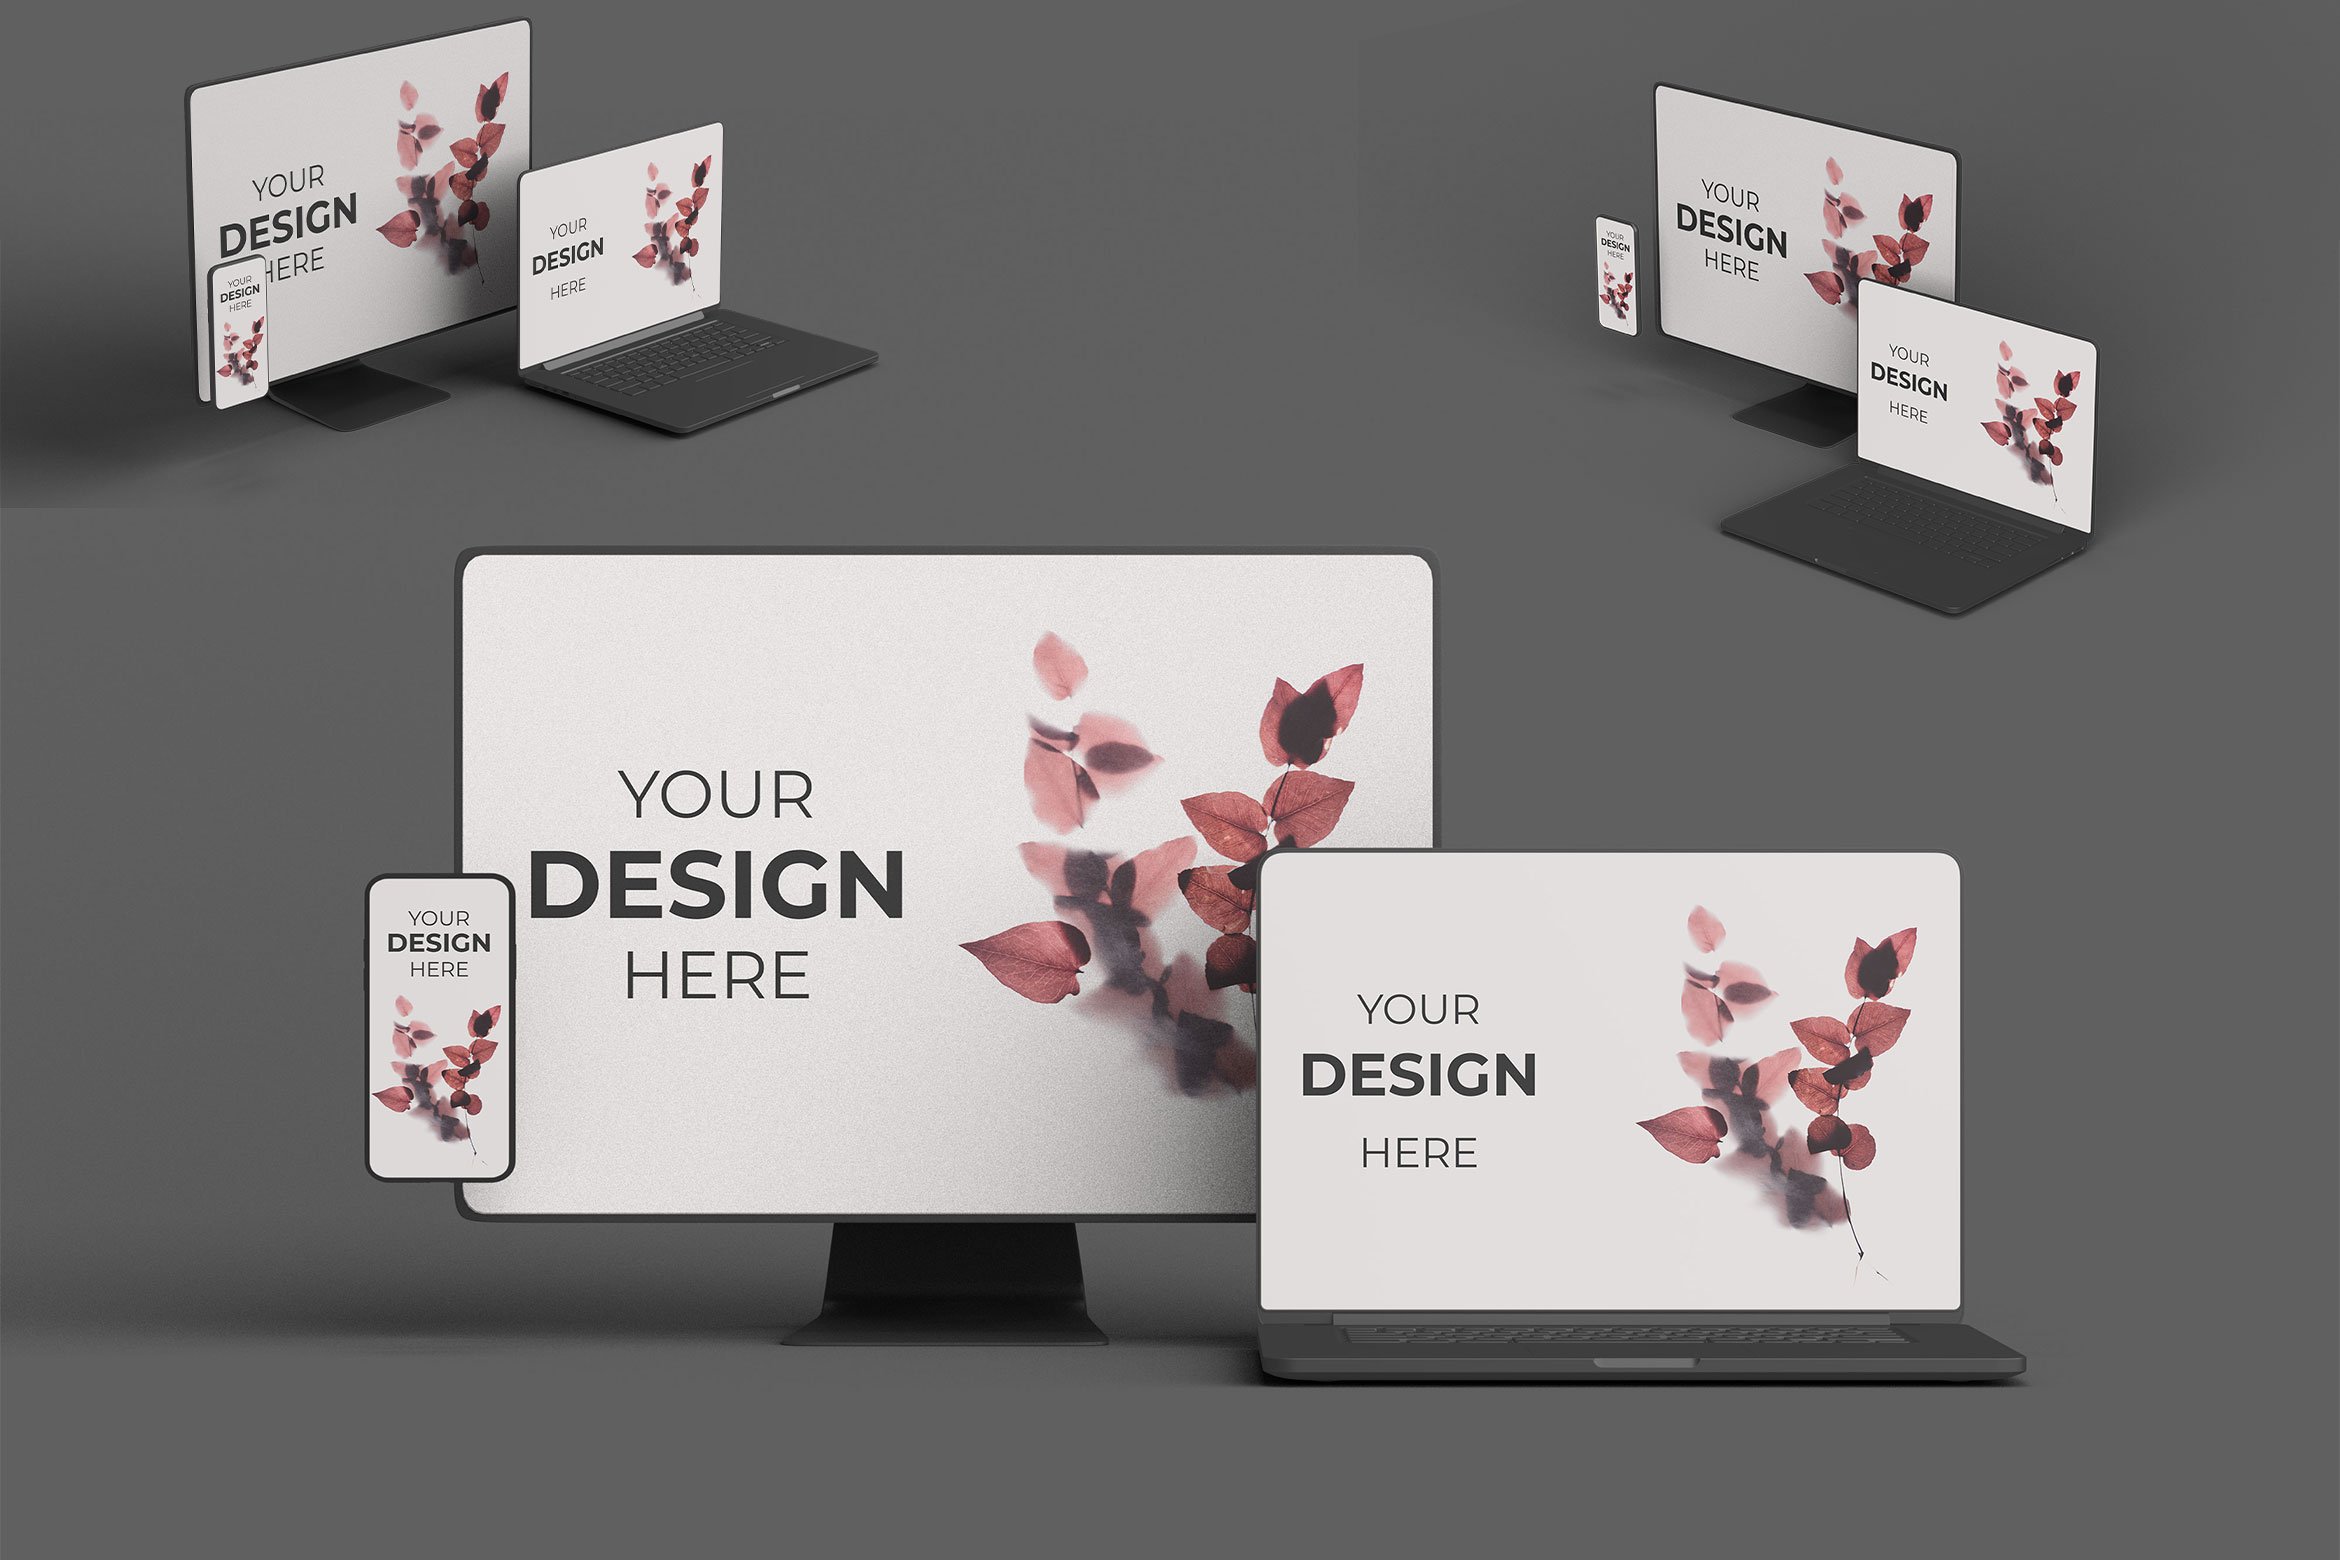 Responsive Devices Mockup cover image.